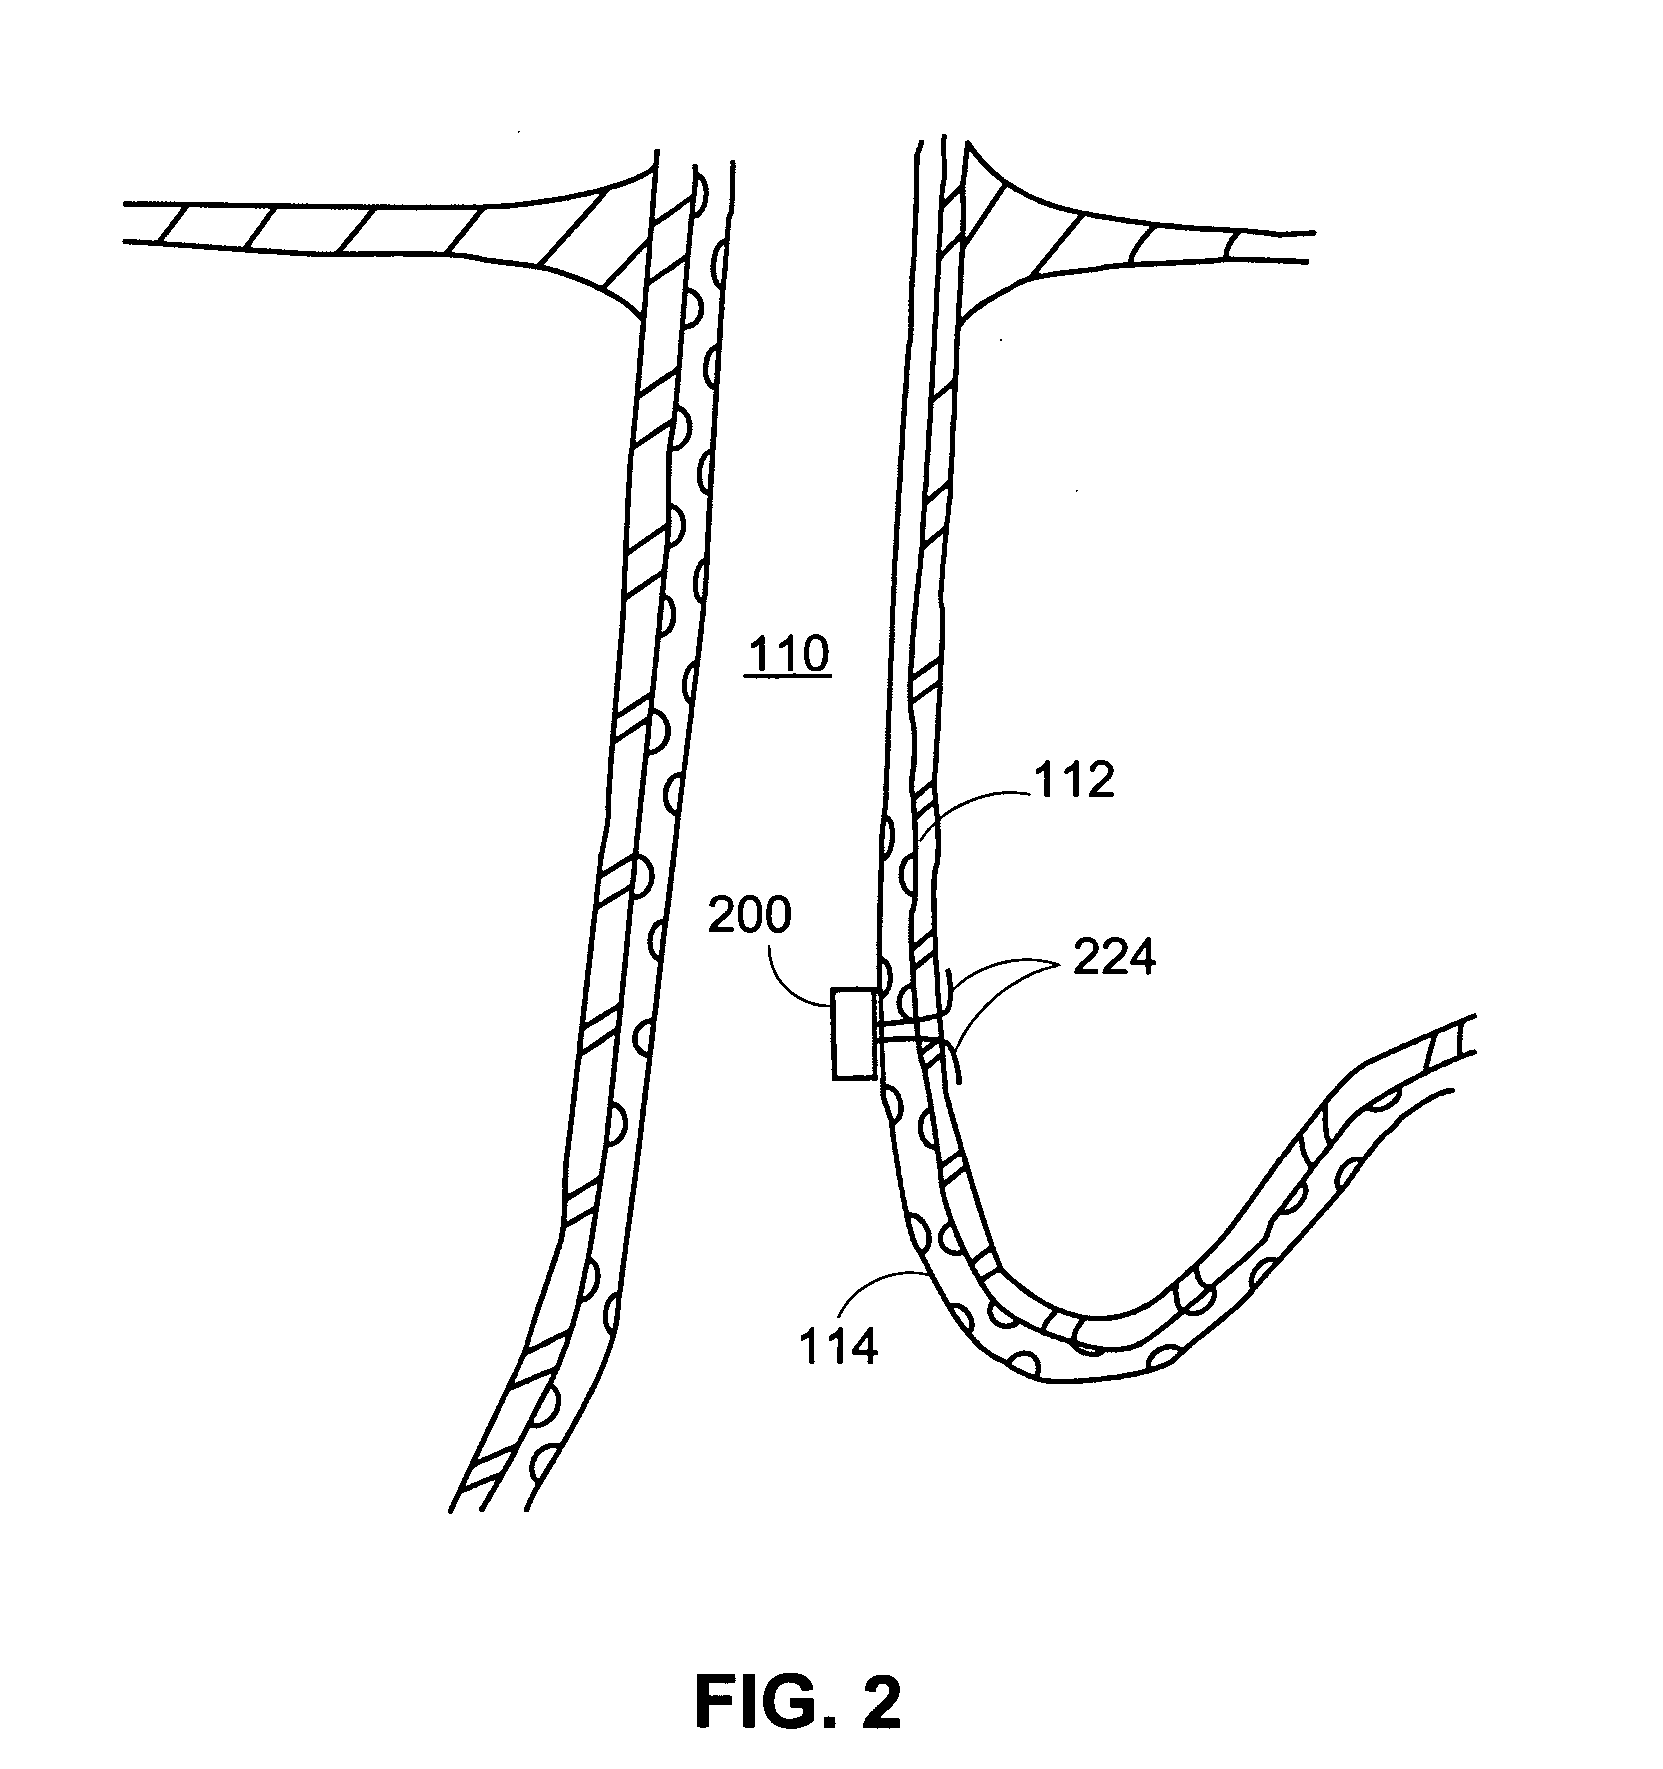 Methods and apparatus for implanting devices into non-sterile body lumens or organs